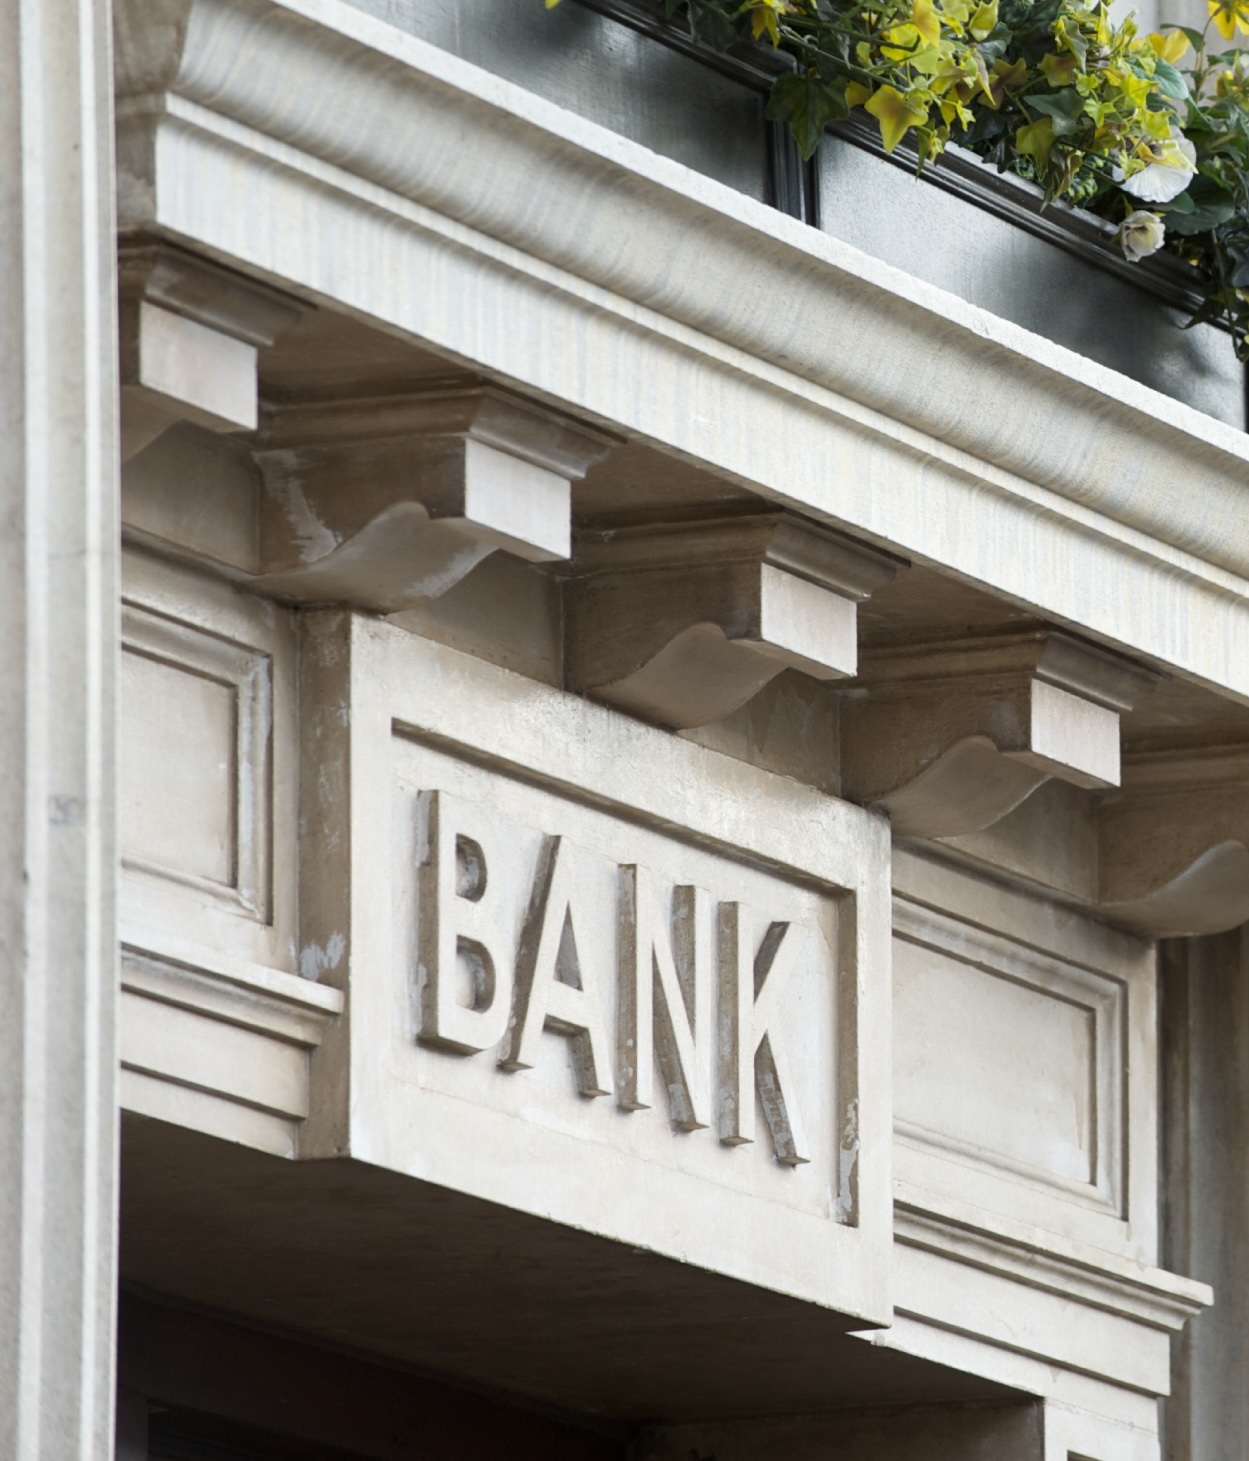 Close up of a bank sign above a neo-classical style entryway